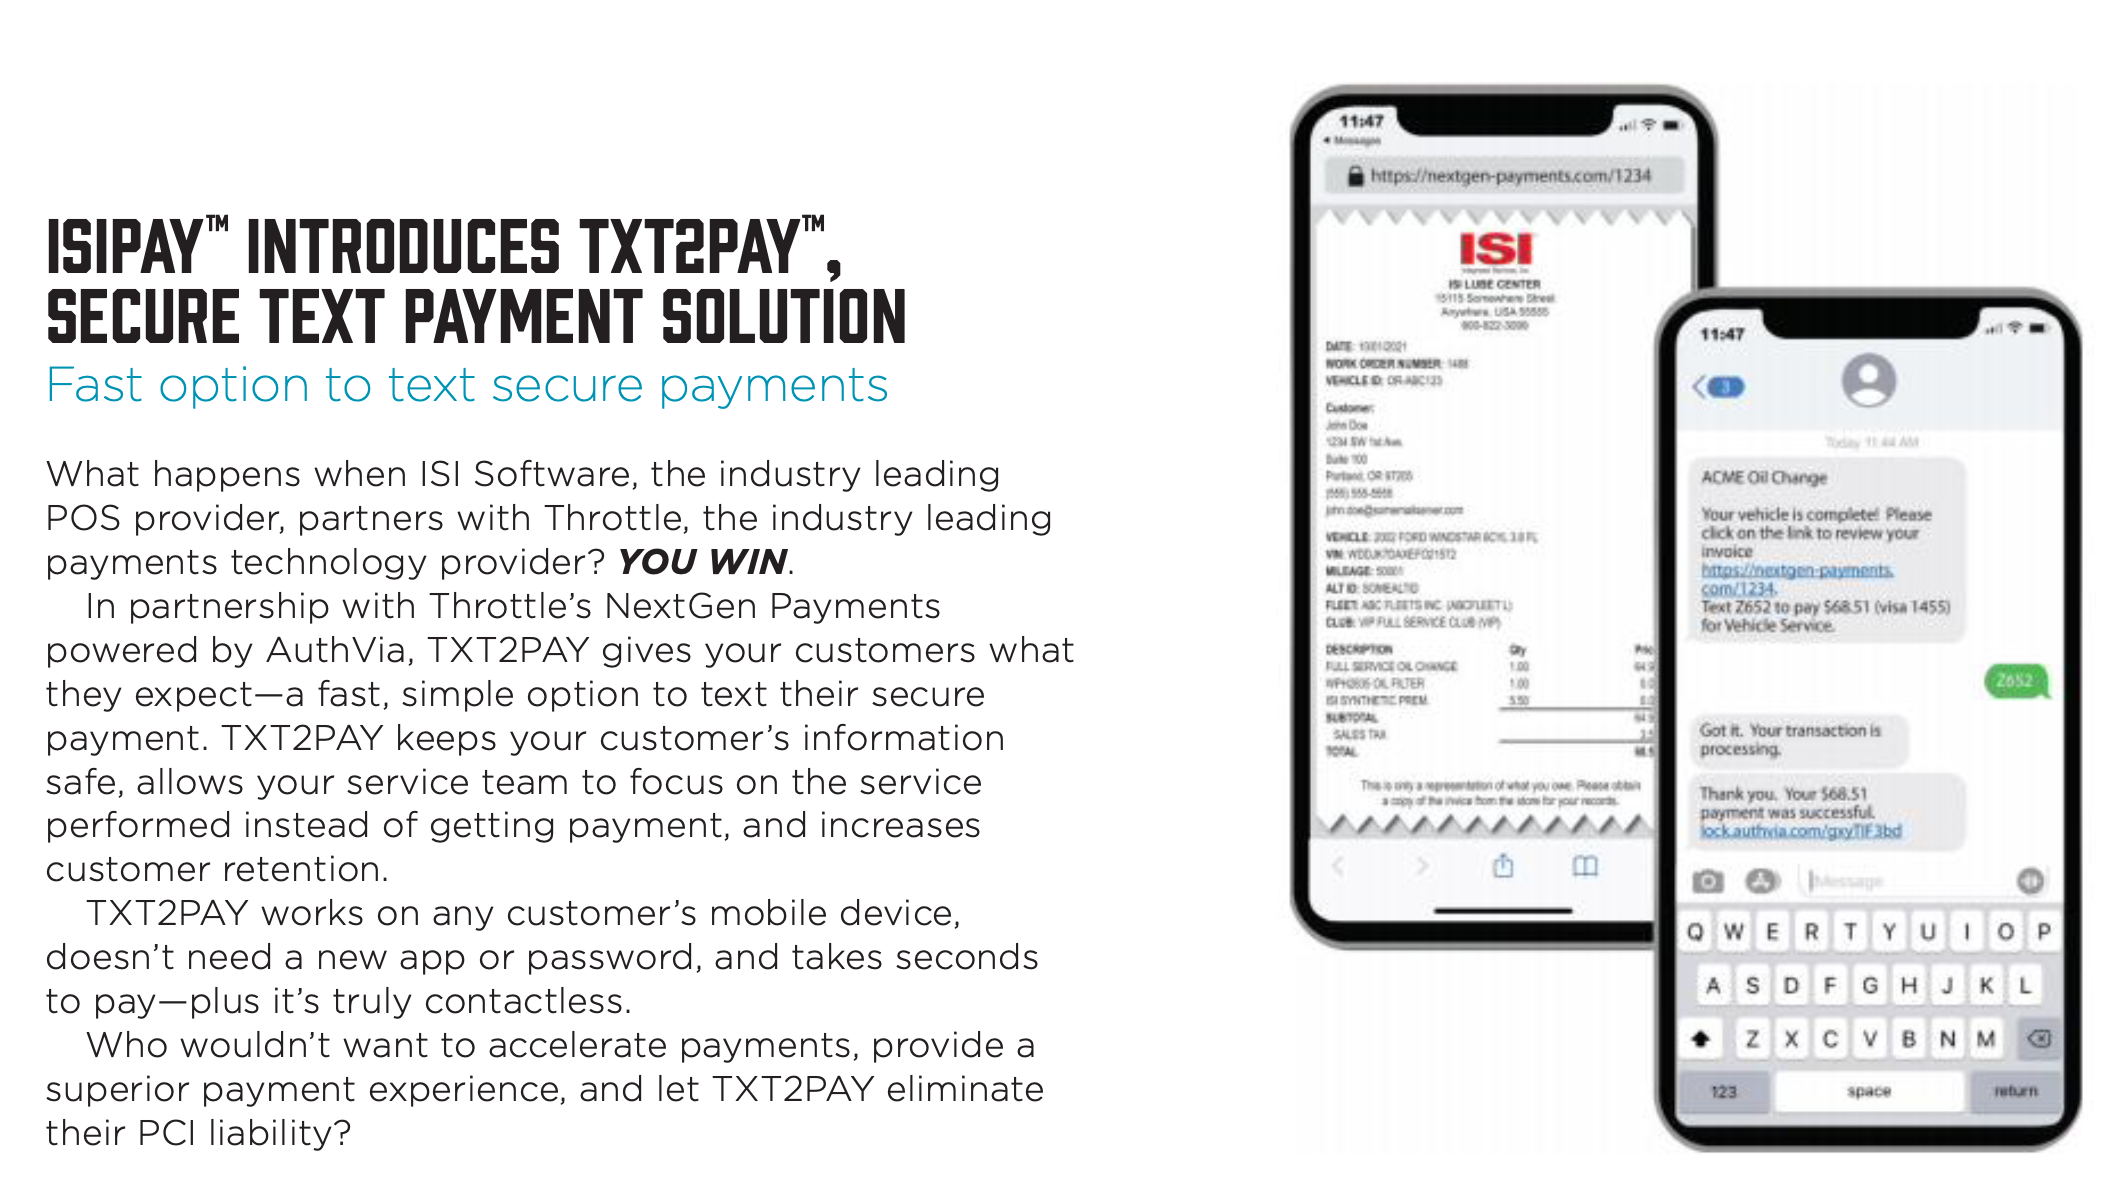 Our TXT2PAY Payment Solution Featured in NOLN